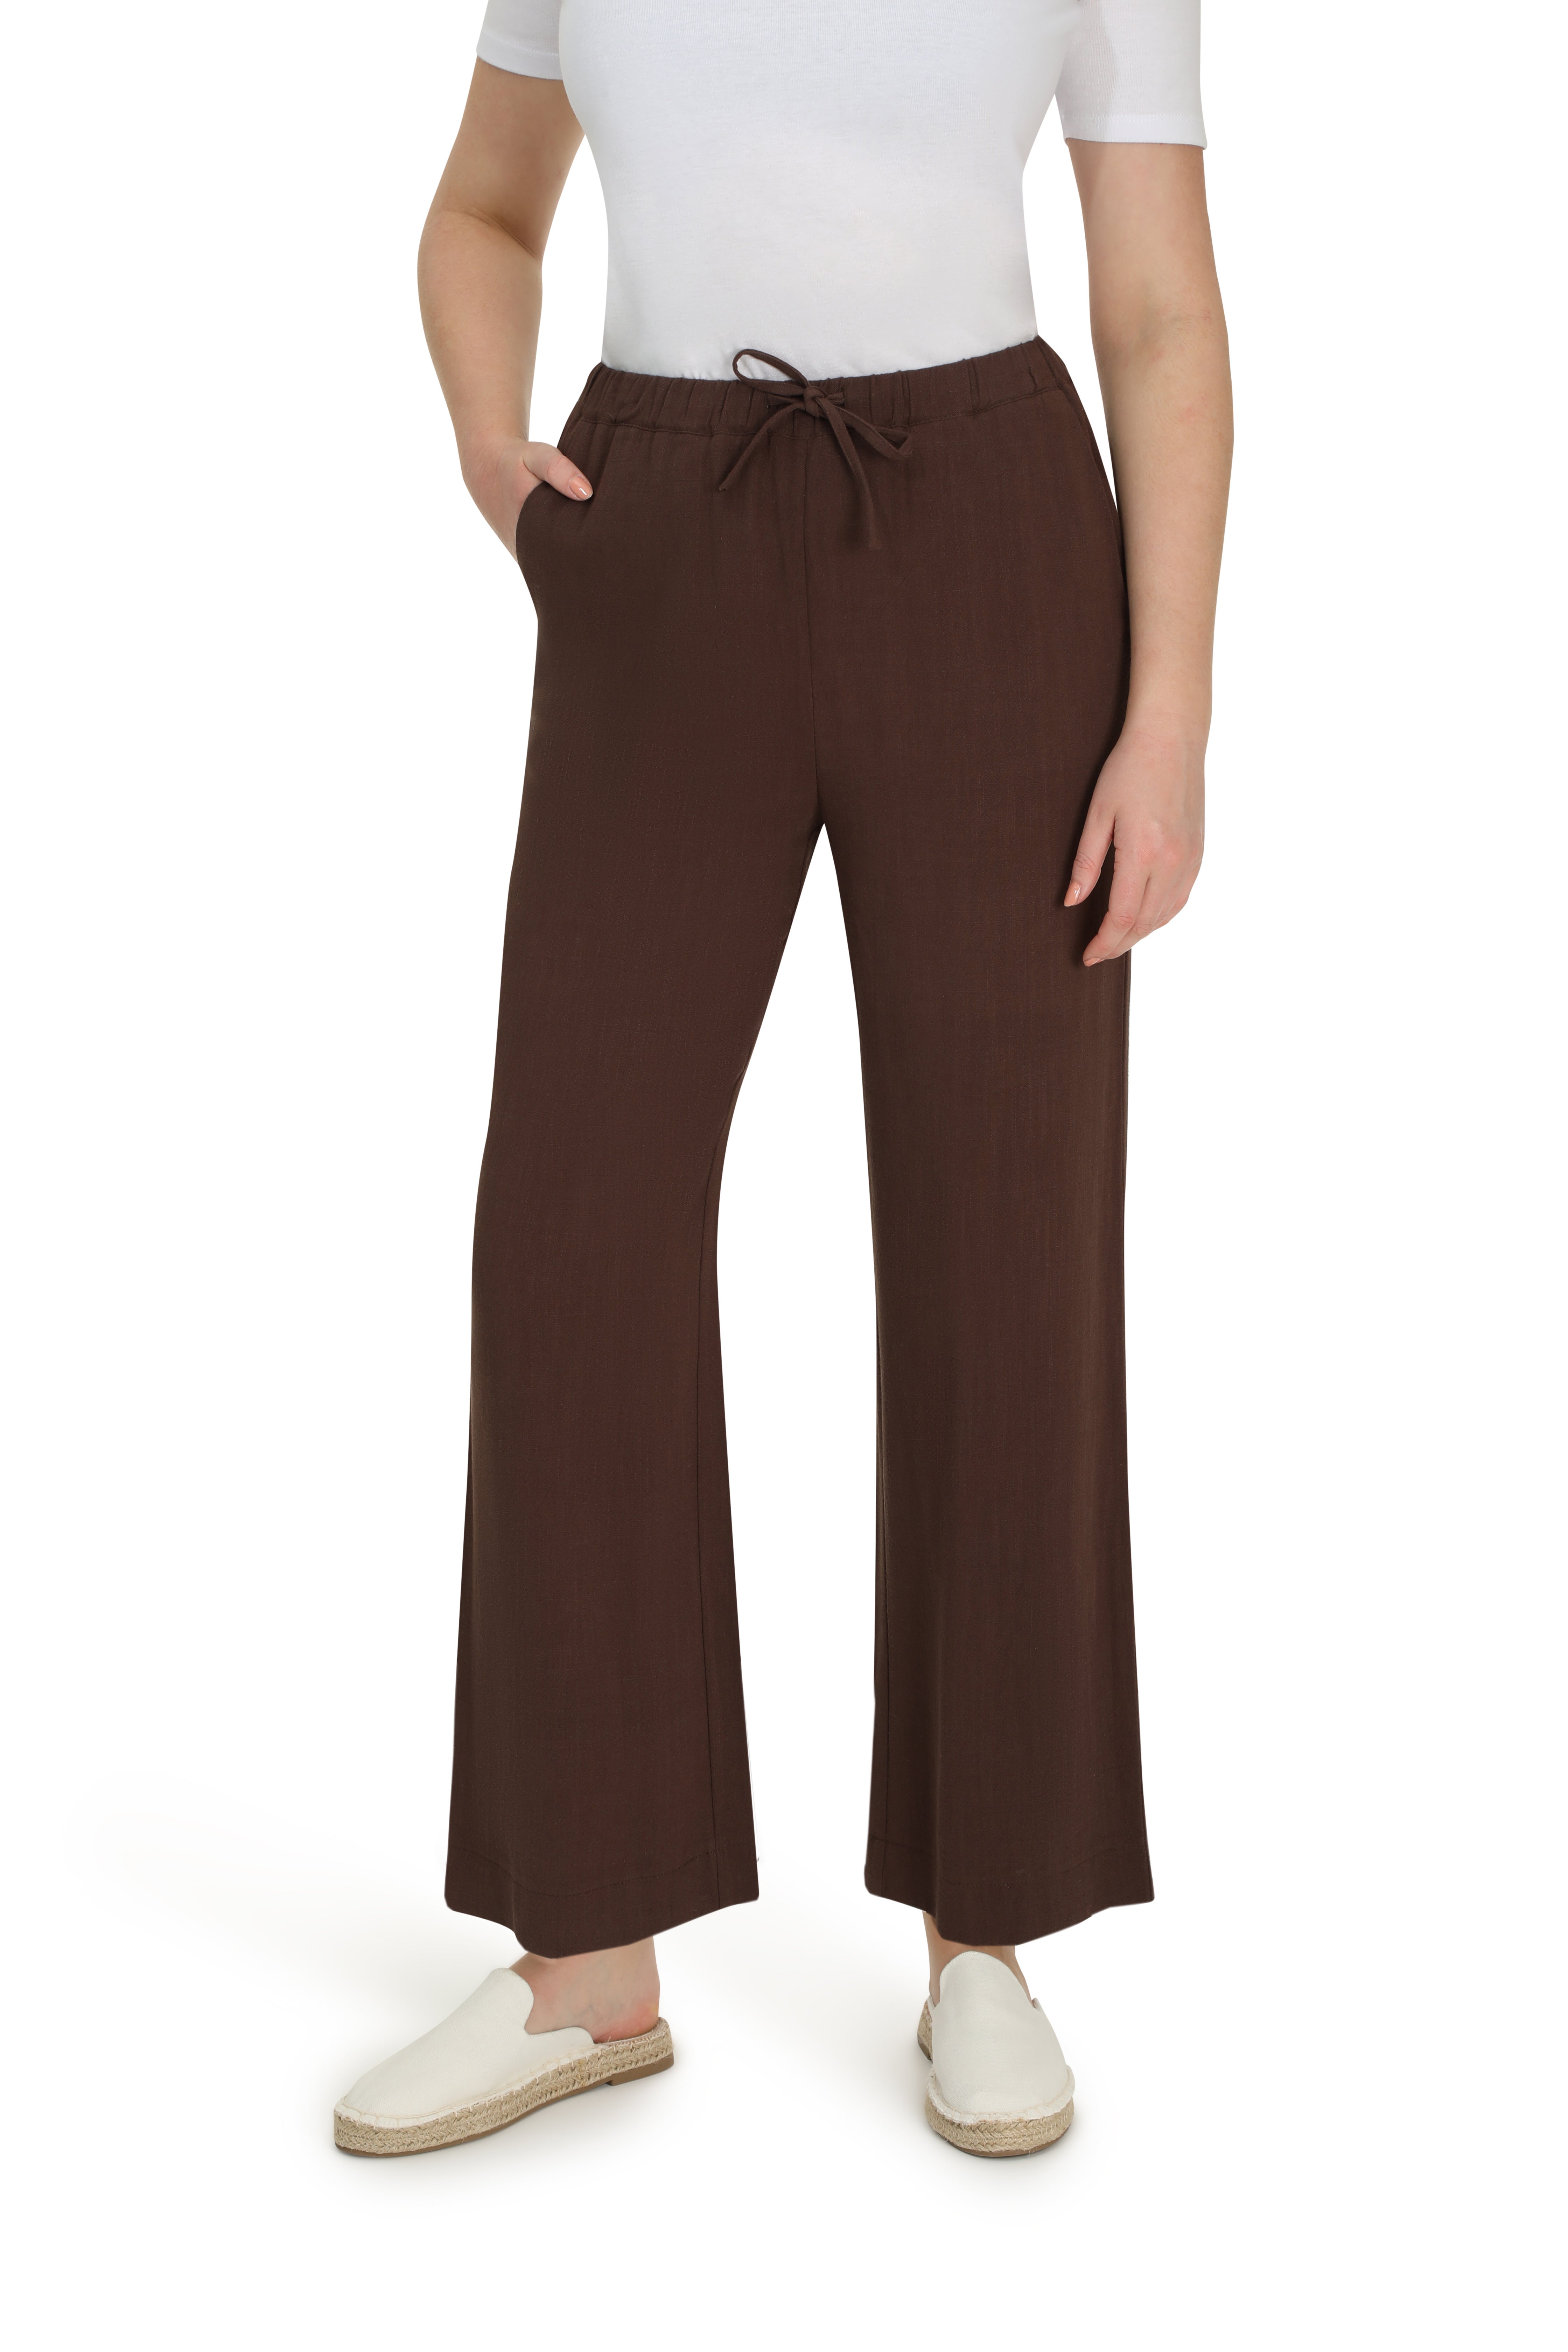 Little Mistress Leather Look Wide Leg Cropped Trousers, Camel at John Lewis  & Partners